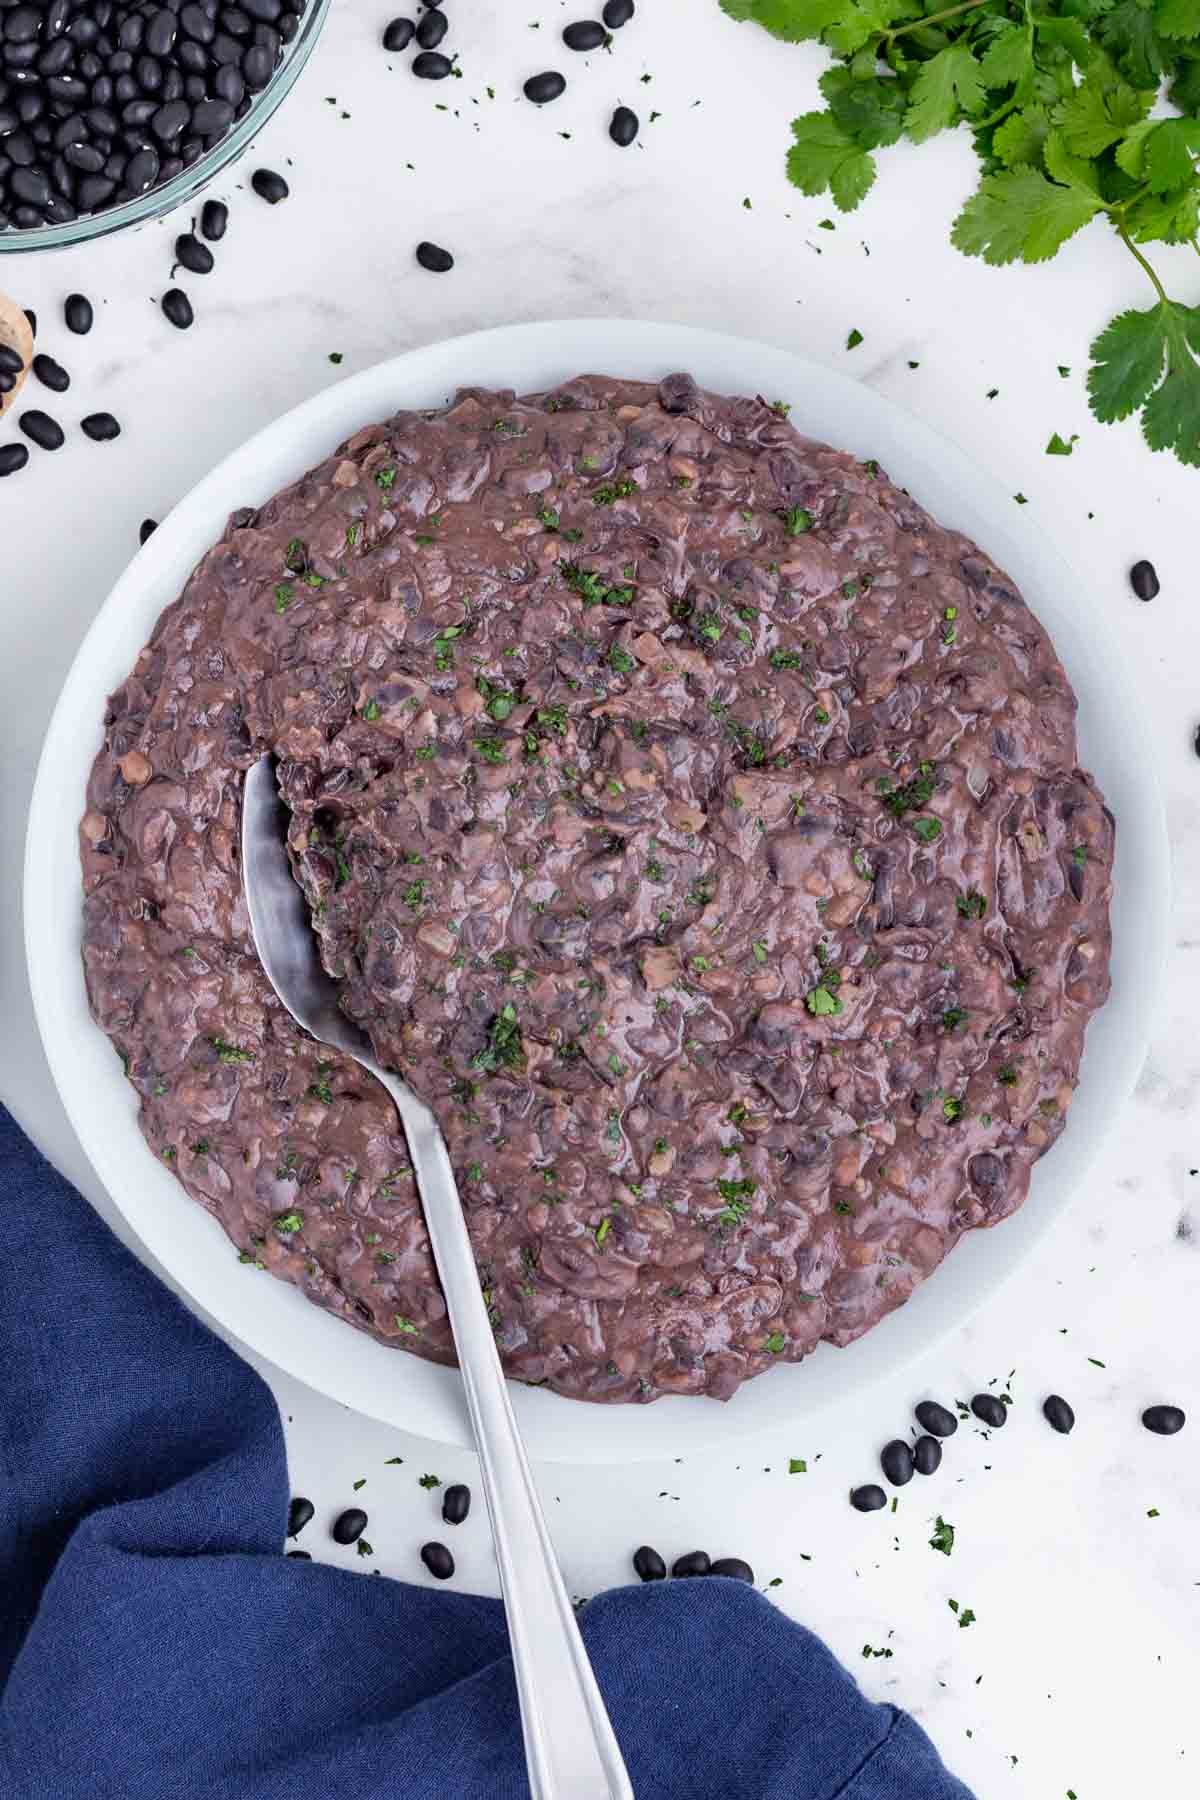 A spoons scoops refried black beans out of a white bowl.